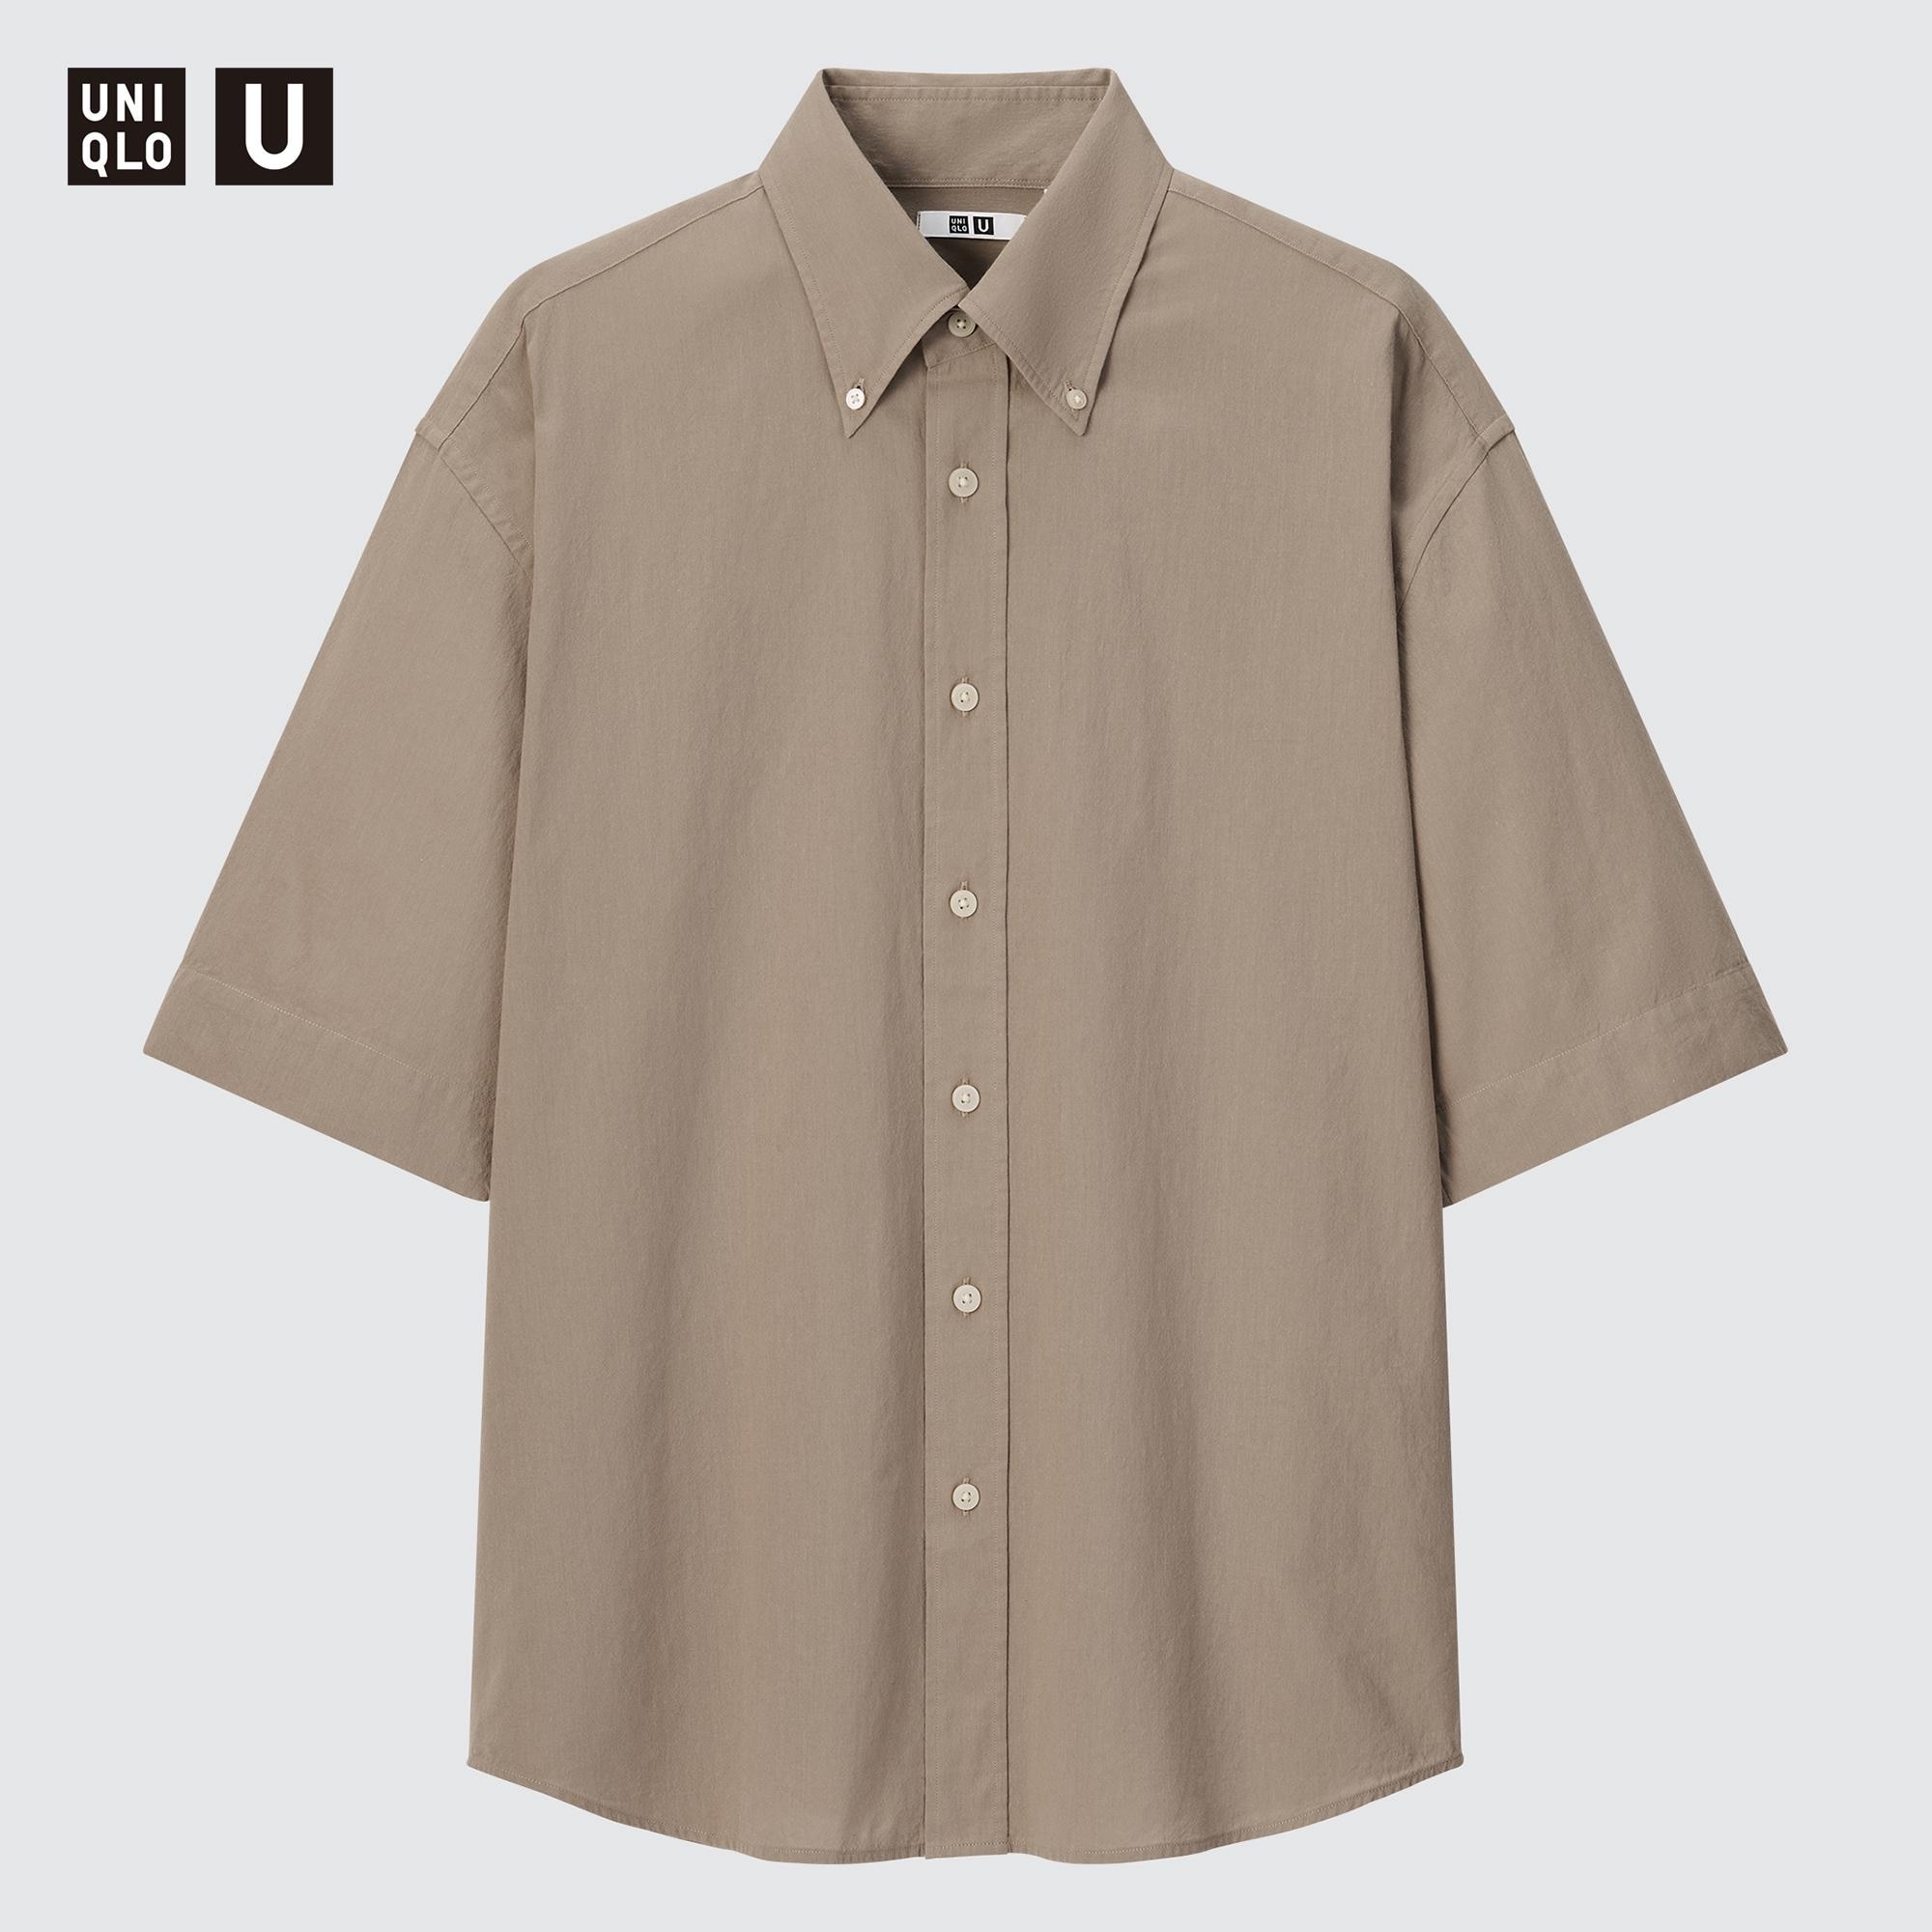 MENS EXTRA FINE COTTON BROADCLOTH LONG SLEEVE SHIRT  UNIQLO VN